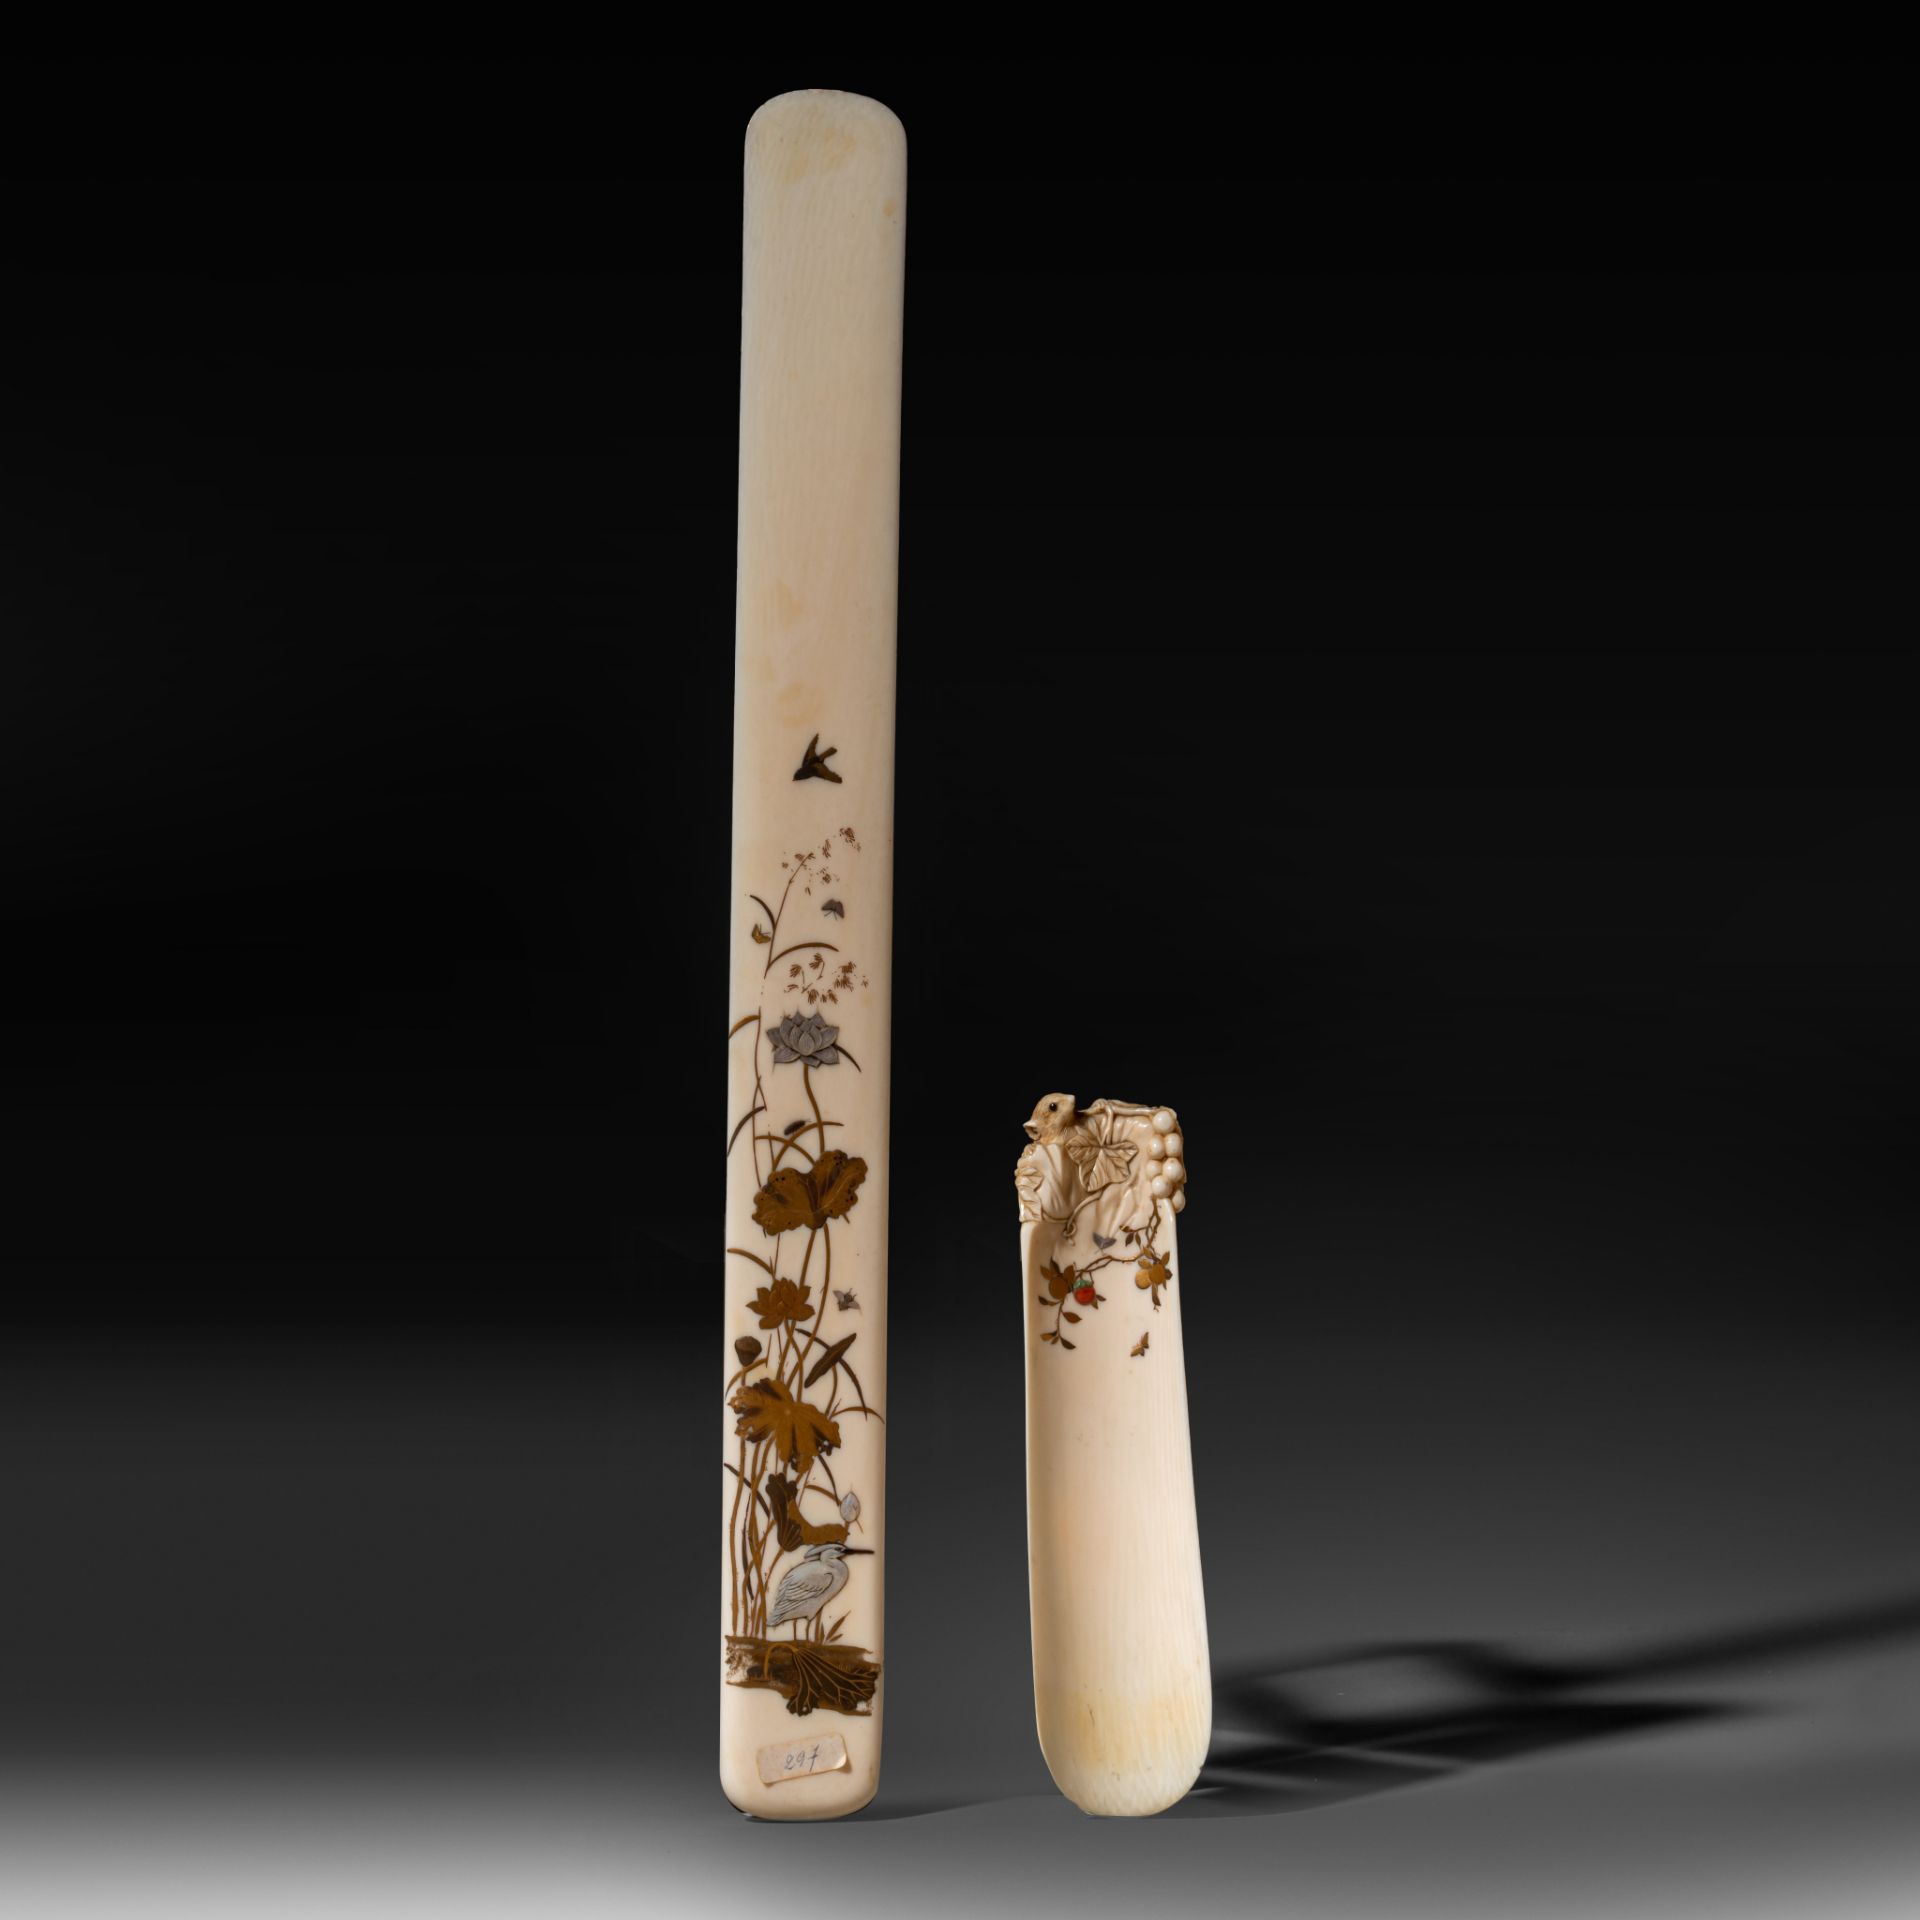 A very fine sculpted Japanese Meiji Period ivory Shibayama decorated shoe horn, L 17,3 cm - 52 g - Image 2 of 5